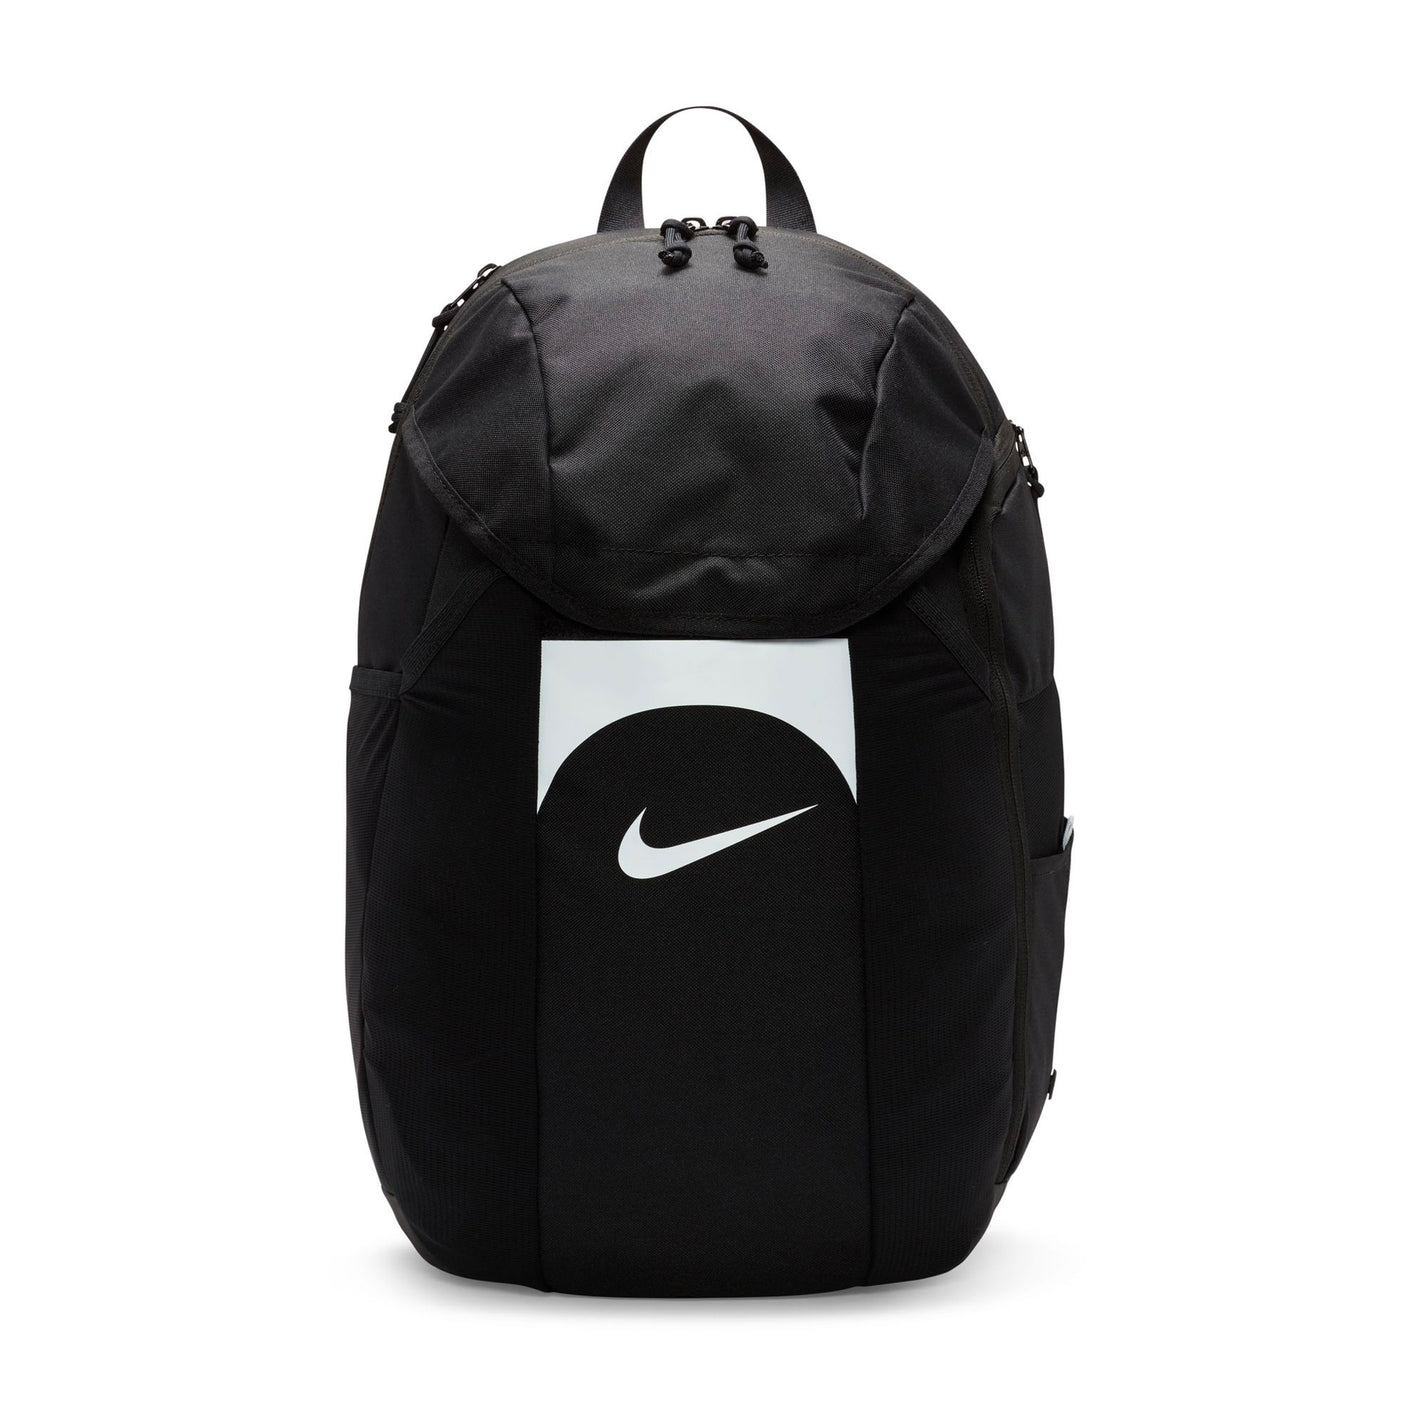 Nike Academy Team Backpack Black/White Front